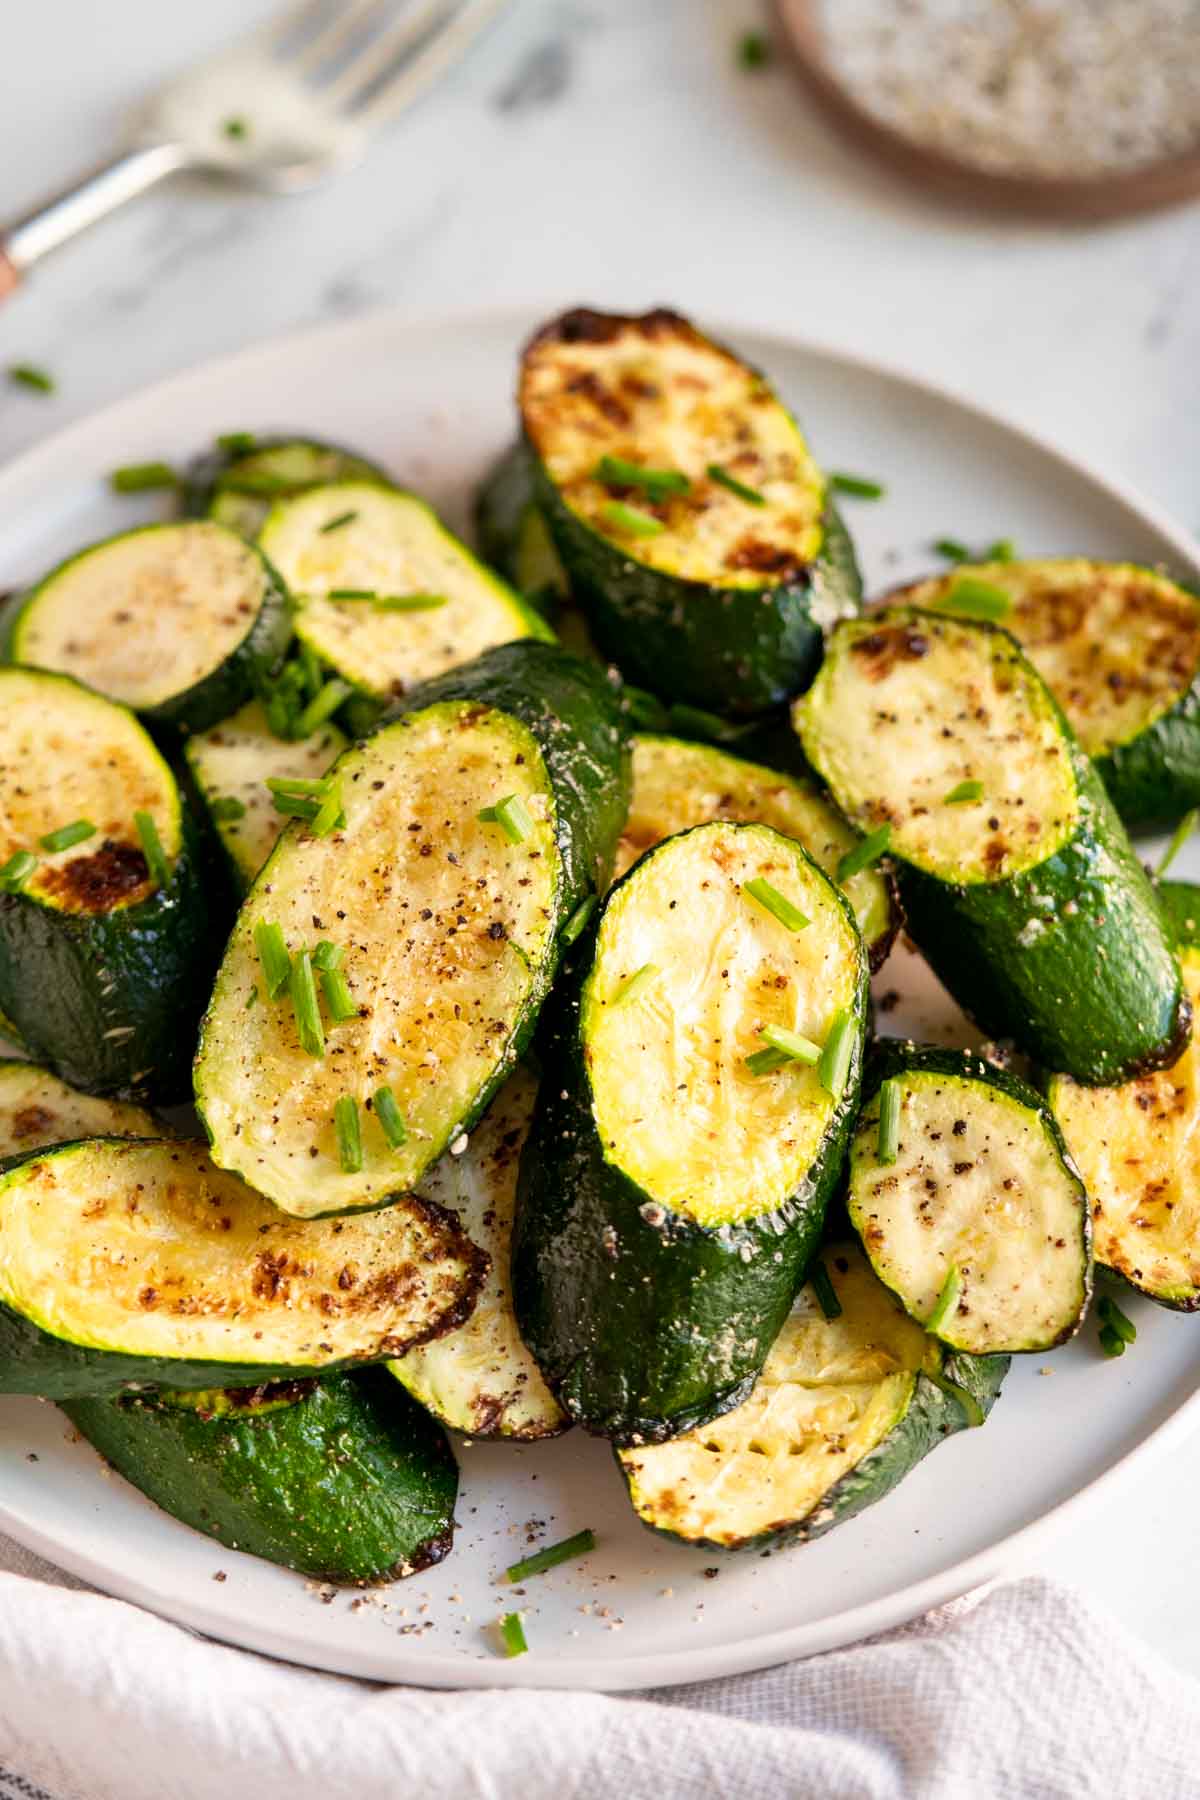 Roasted zucchini on a plate.